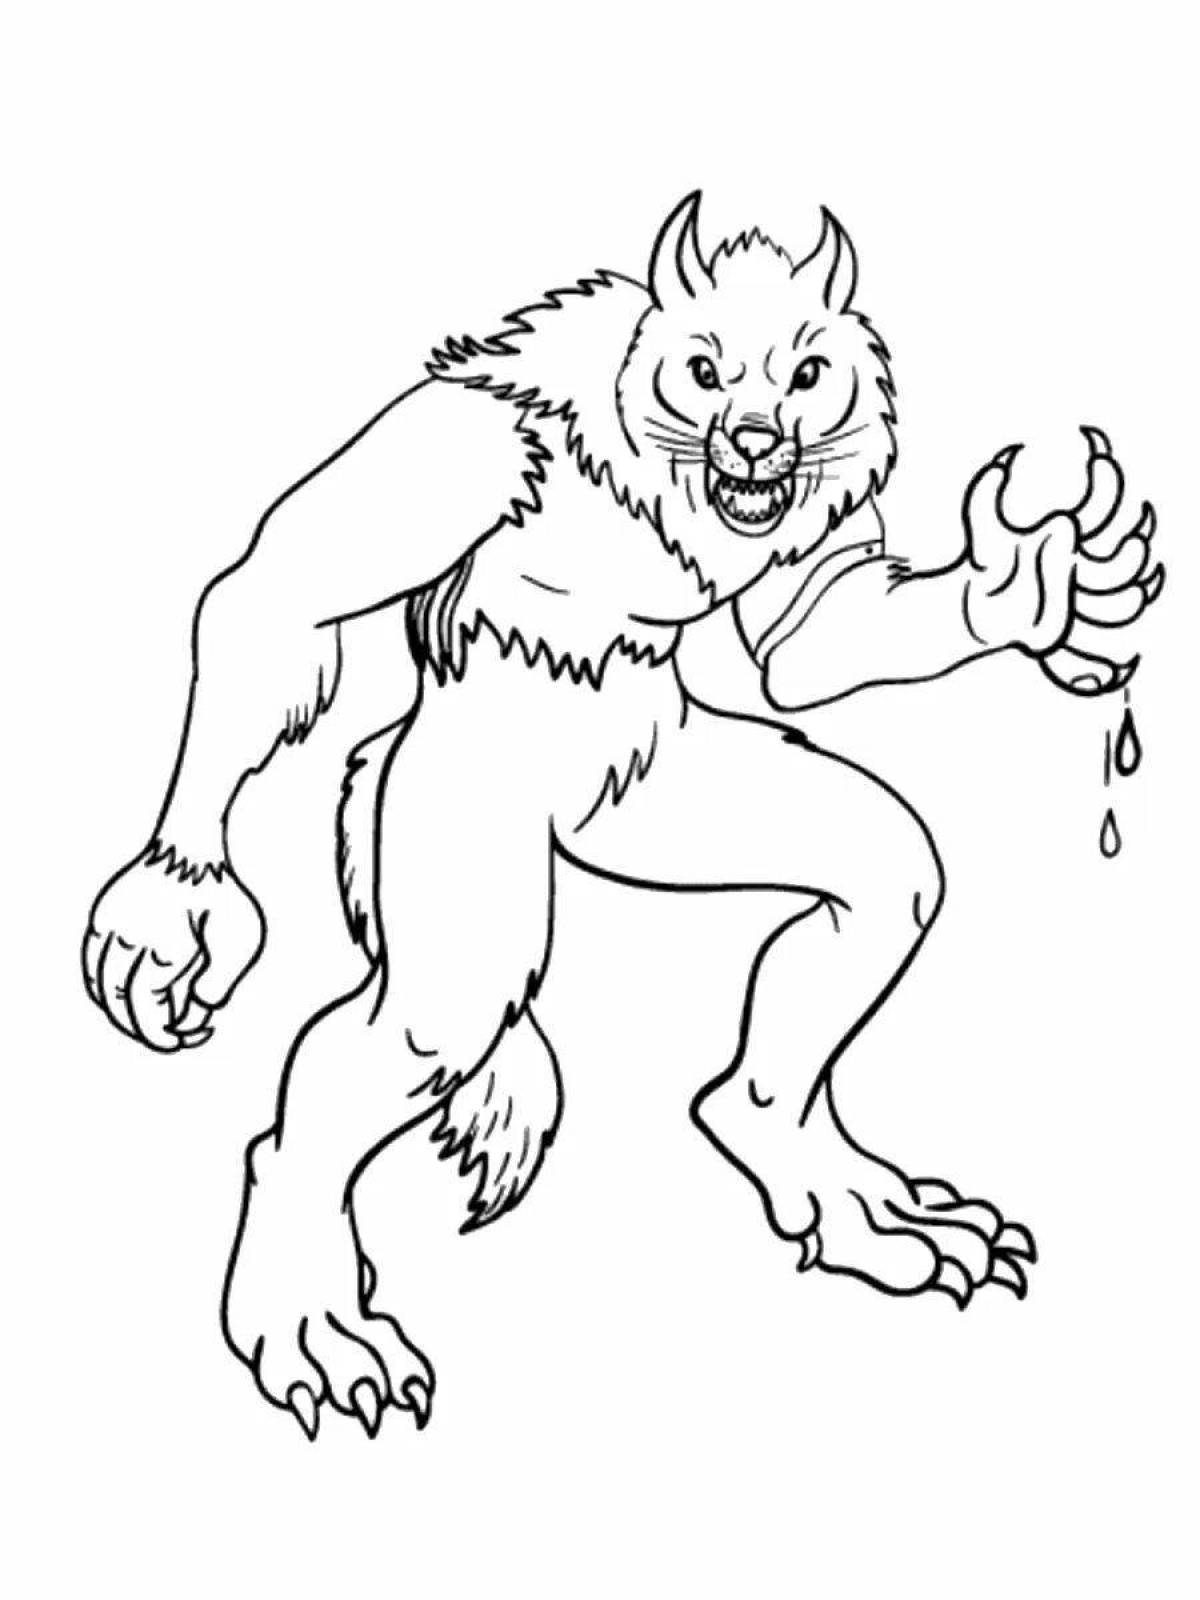 Frightening werewolf coloring pages for kids